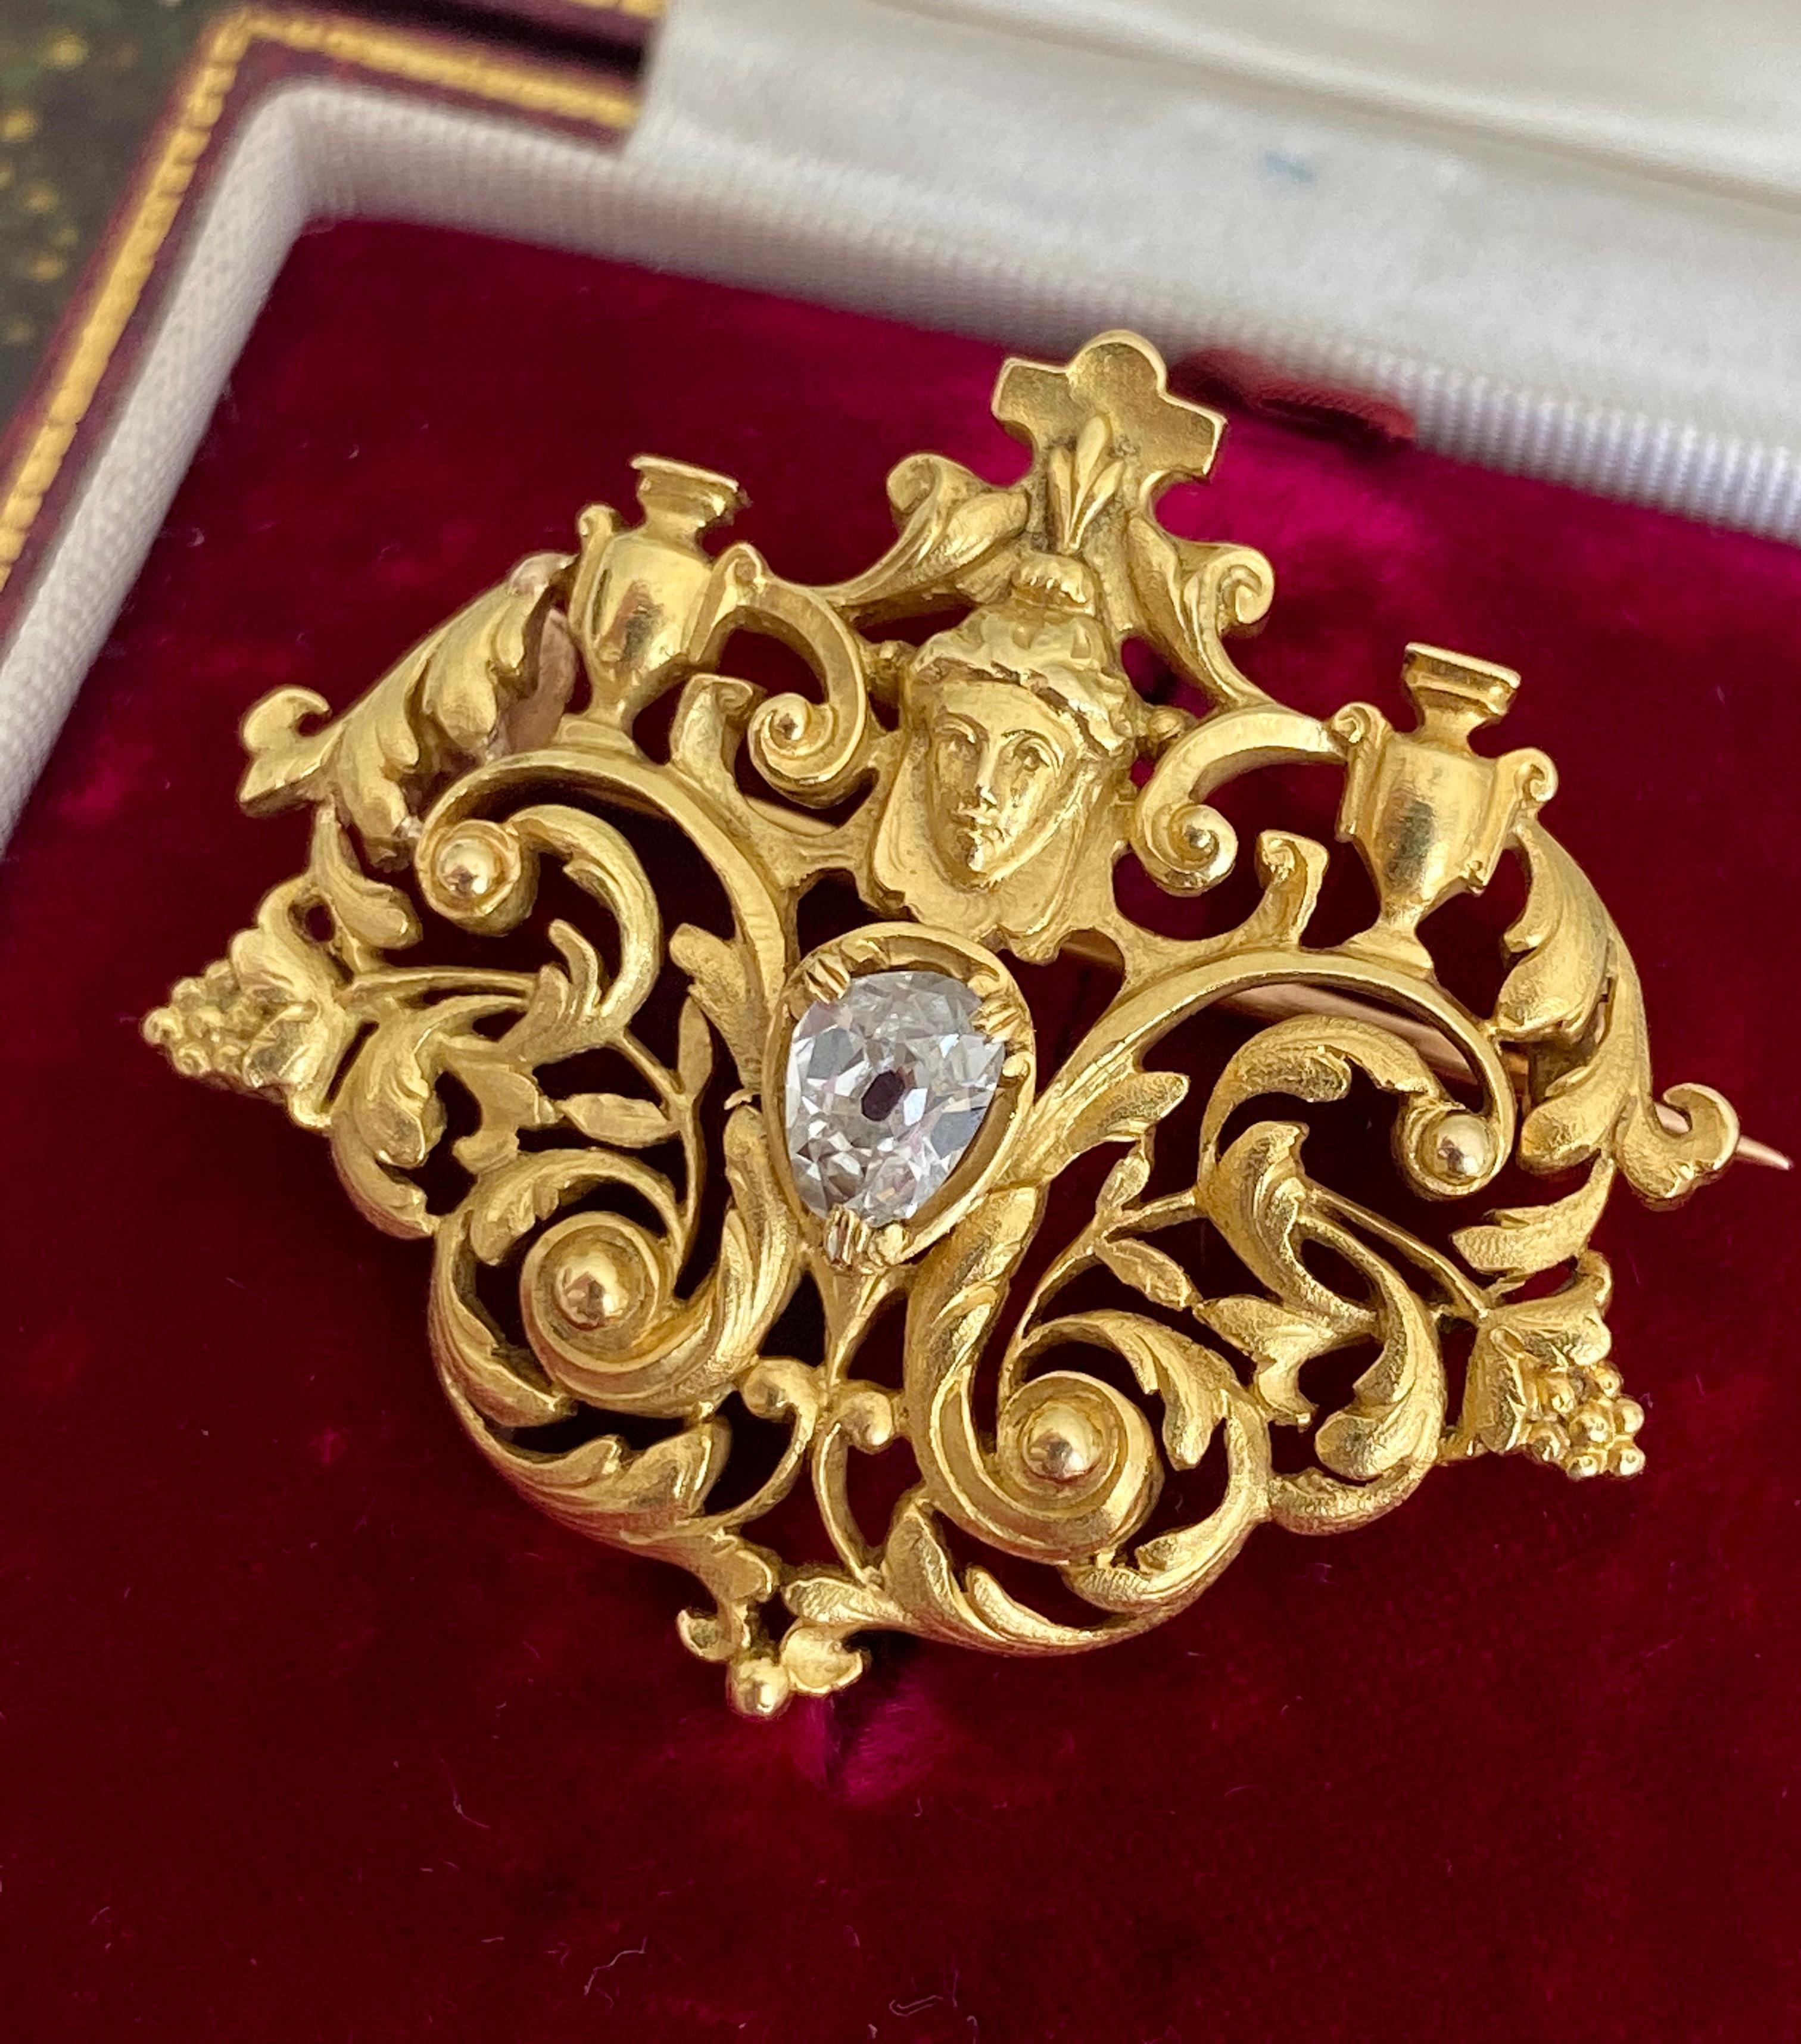 This exceptional French brooch centers on a serene beauty with upswept hair perched above an old pear cut diamond. Symmetrically arranged openwork foliate flow around her, further embellished by a tiny clusters of grapes and a pair of handled urns.